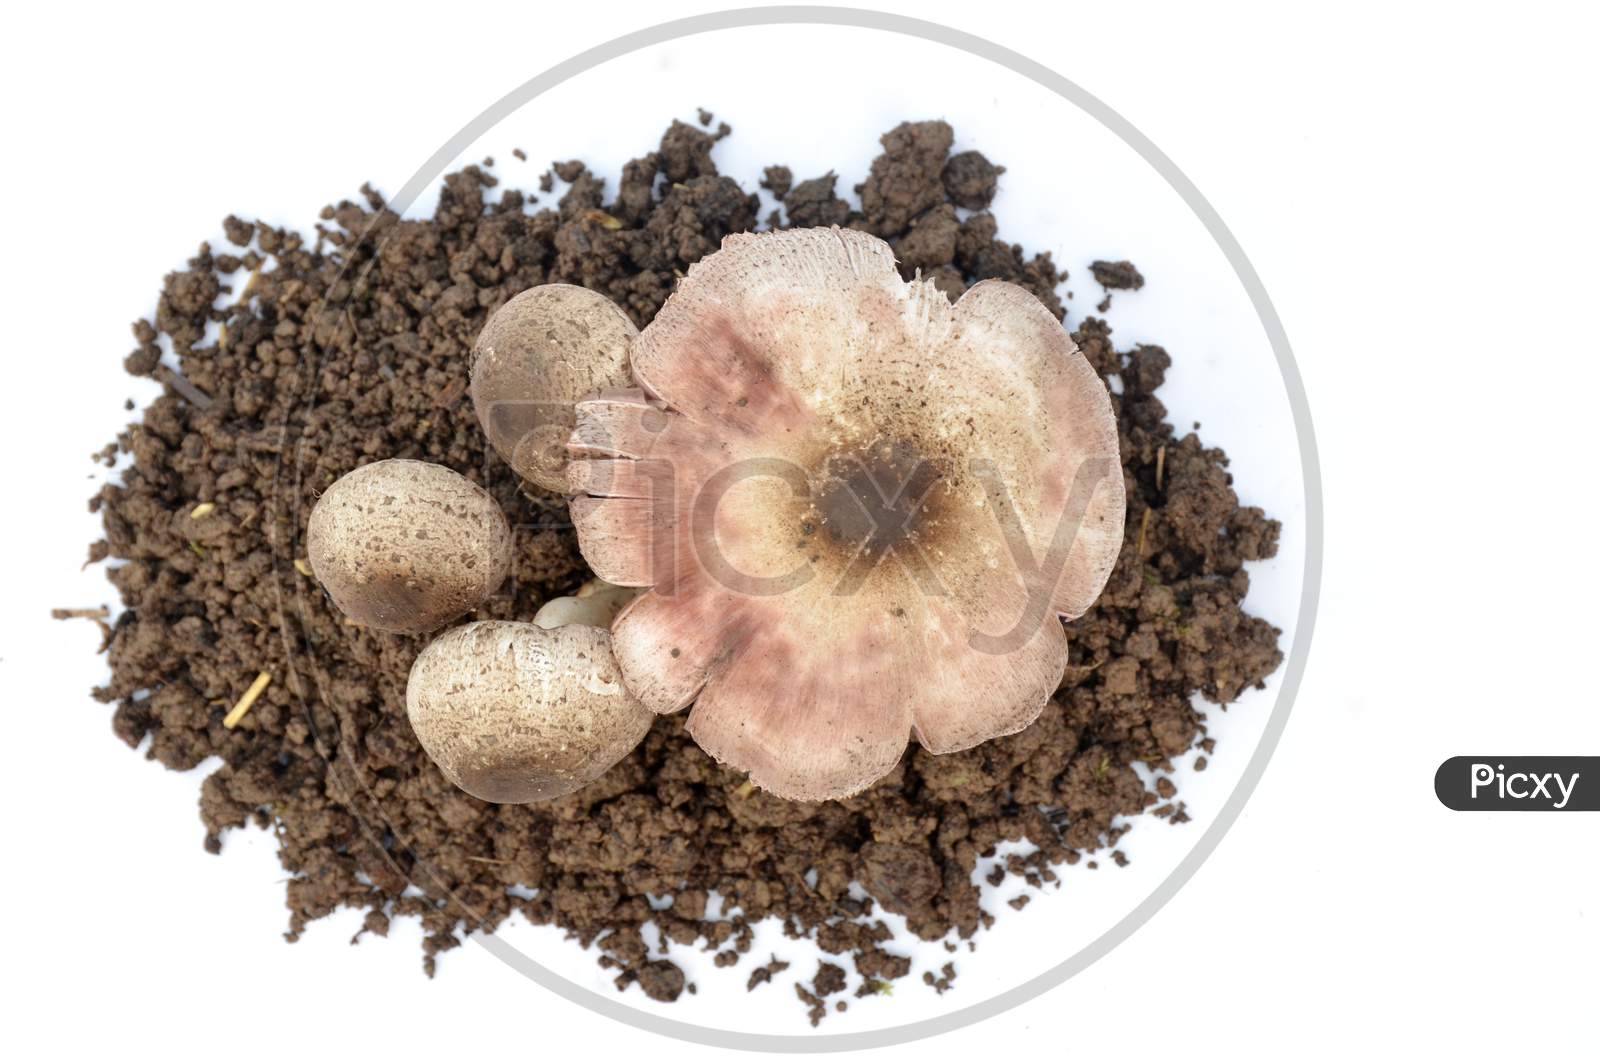 bunch the brown color mushroom seedlings isolated on white background.